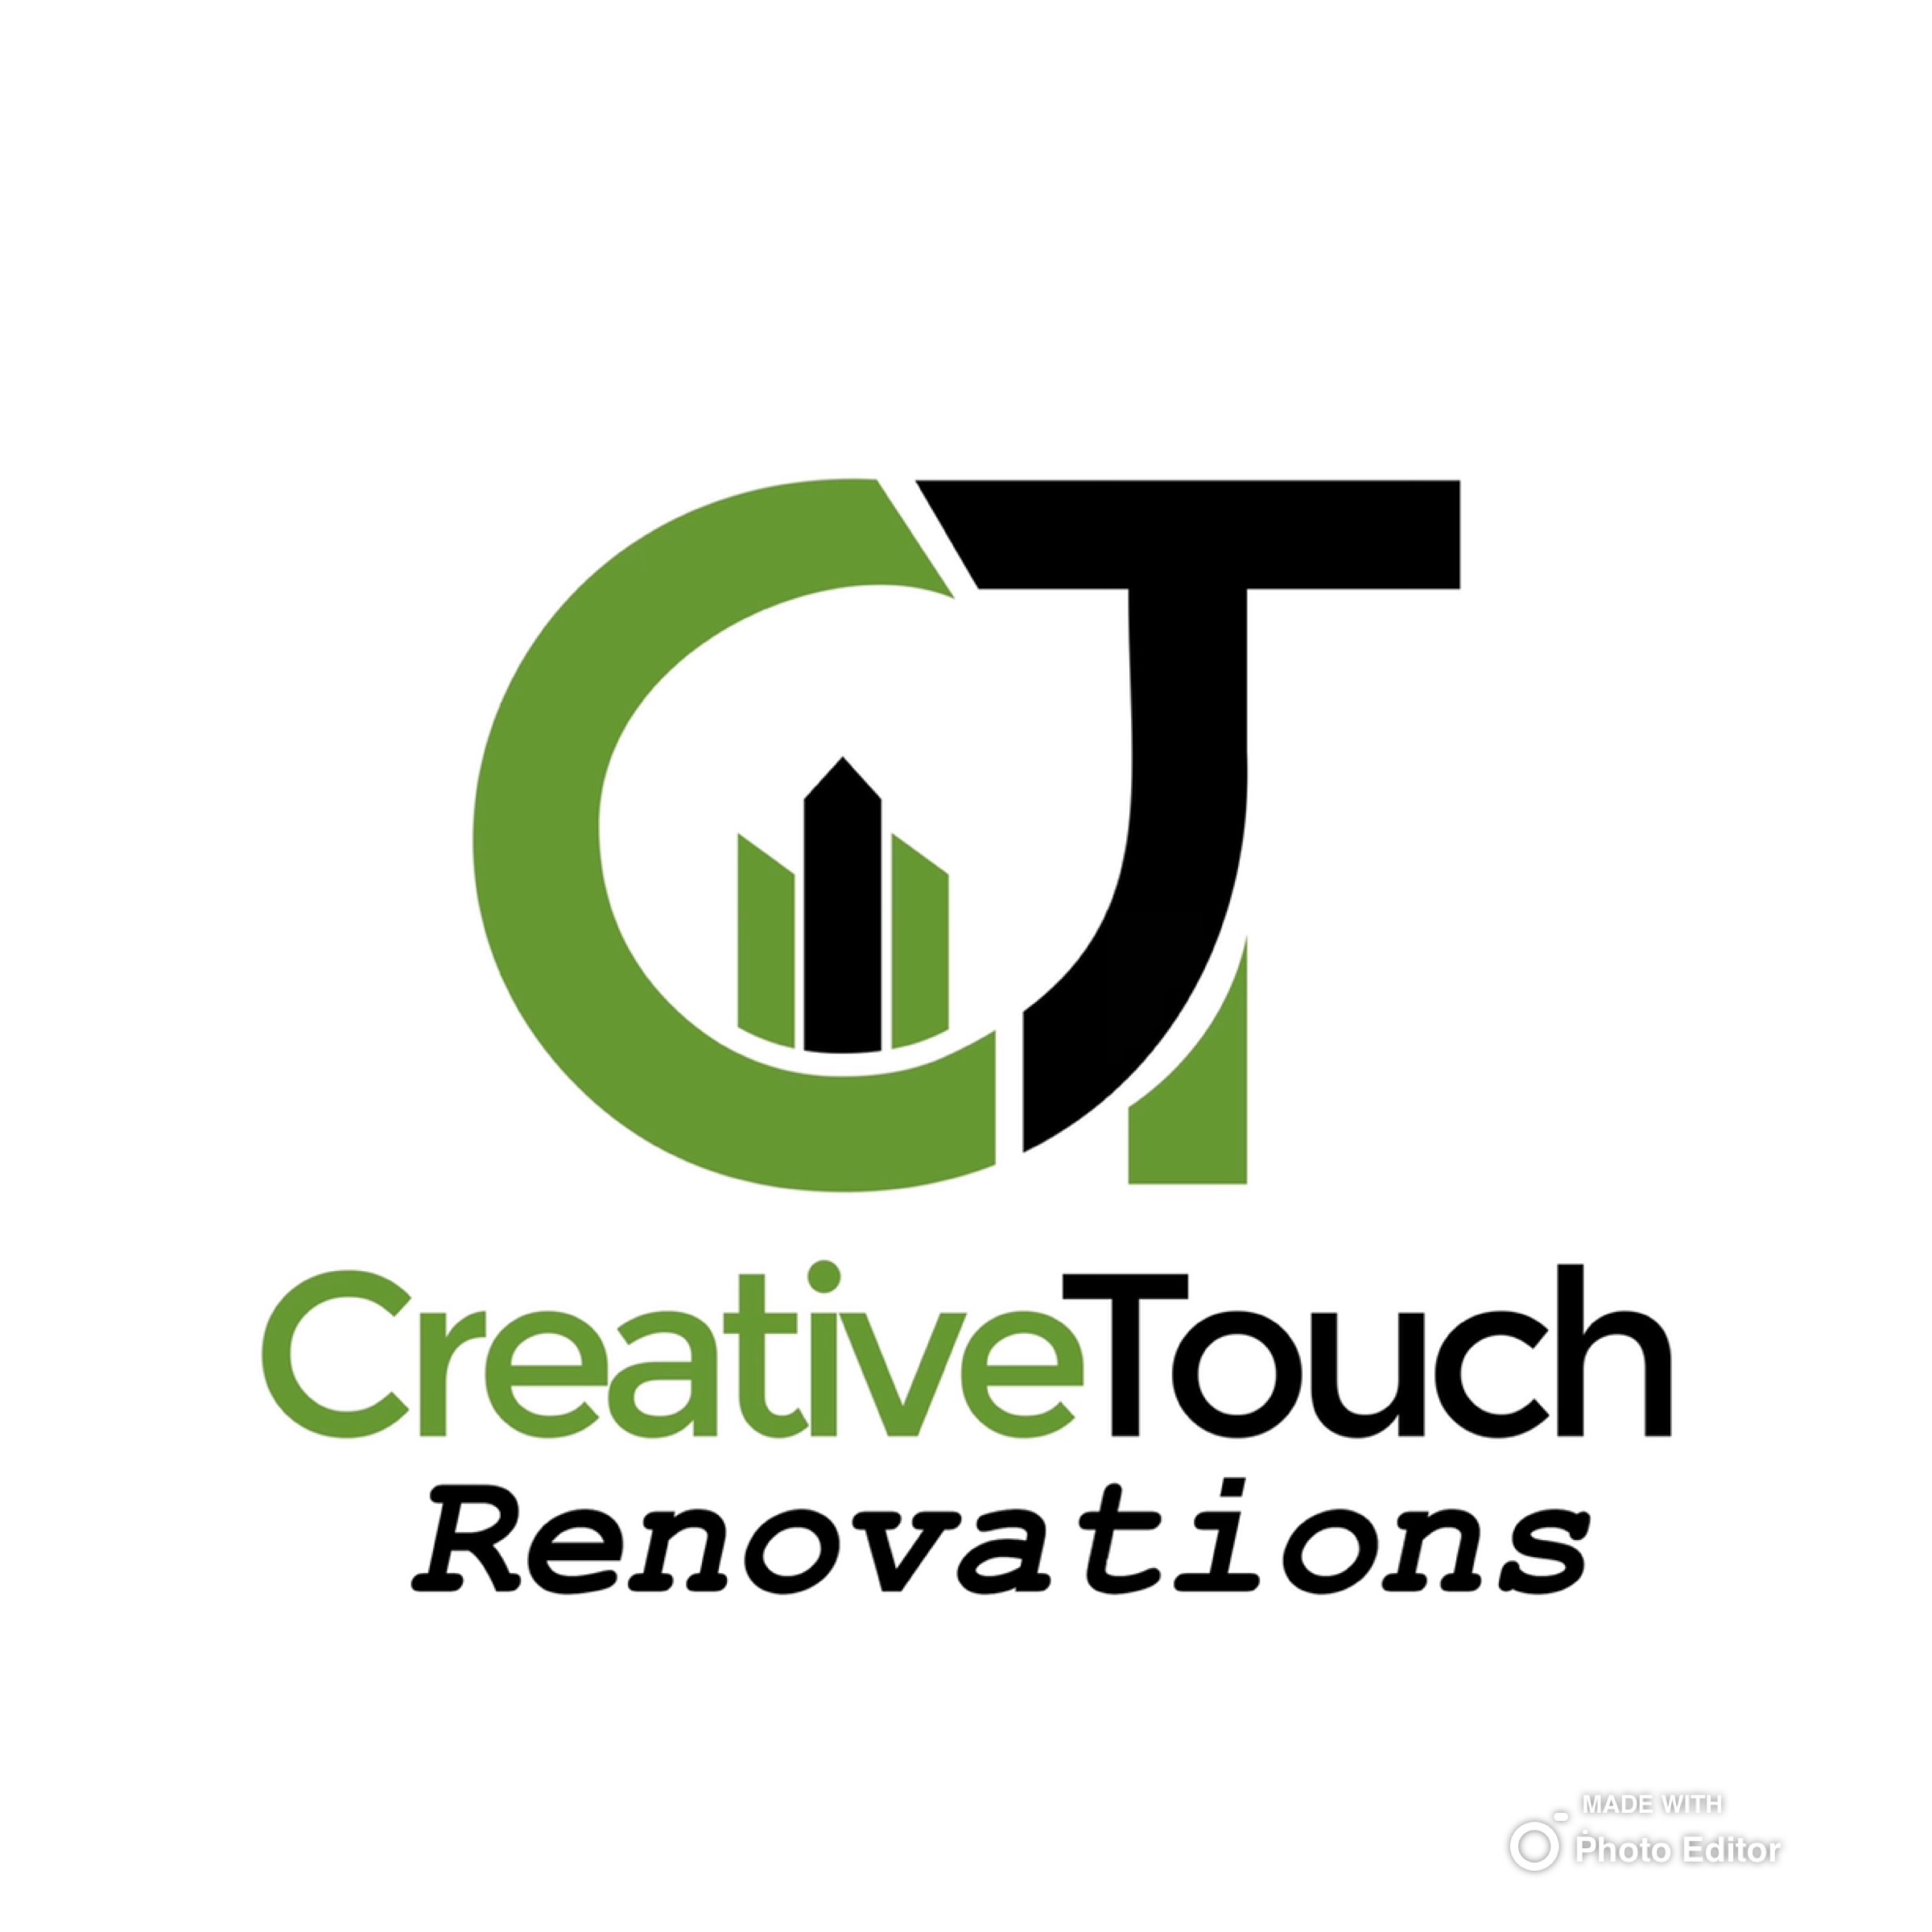 Creative Touch Renovations